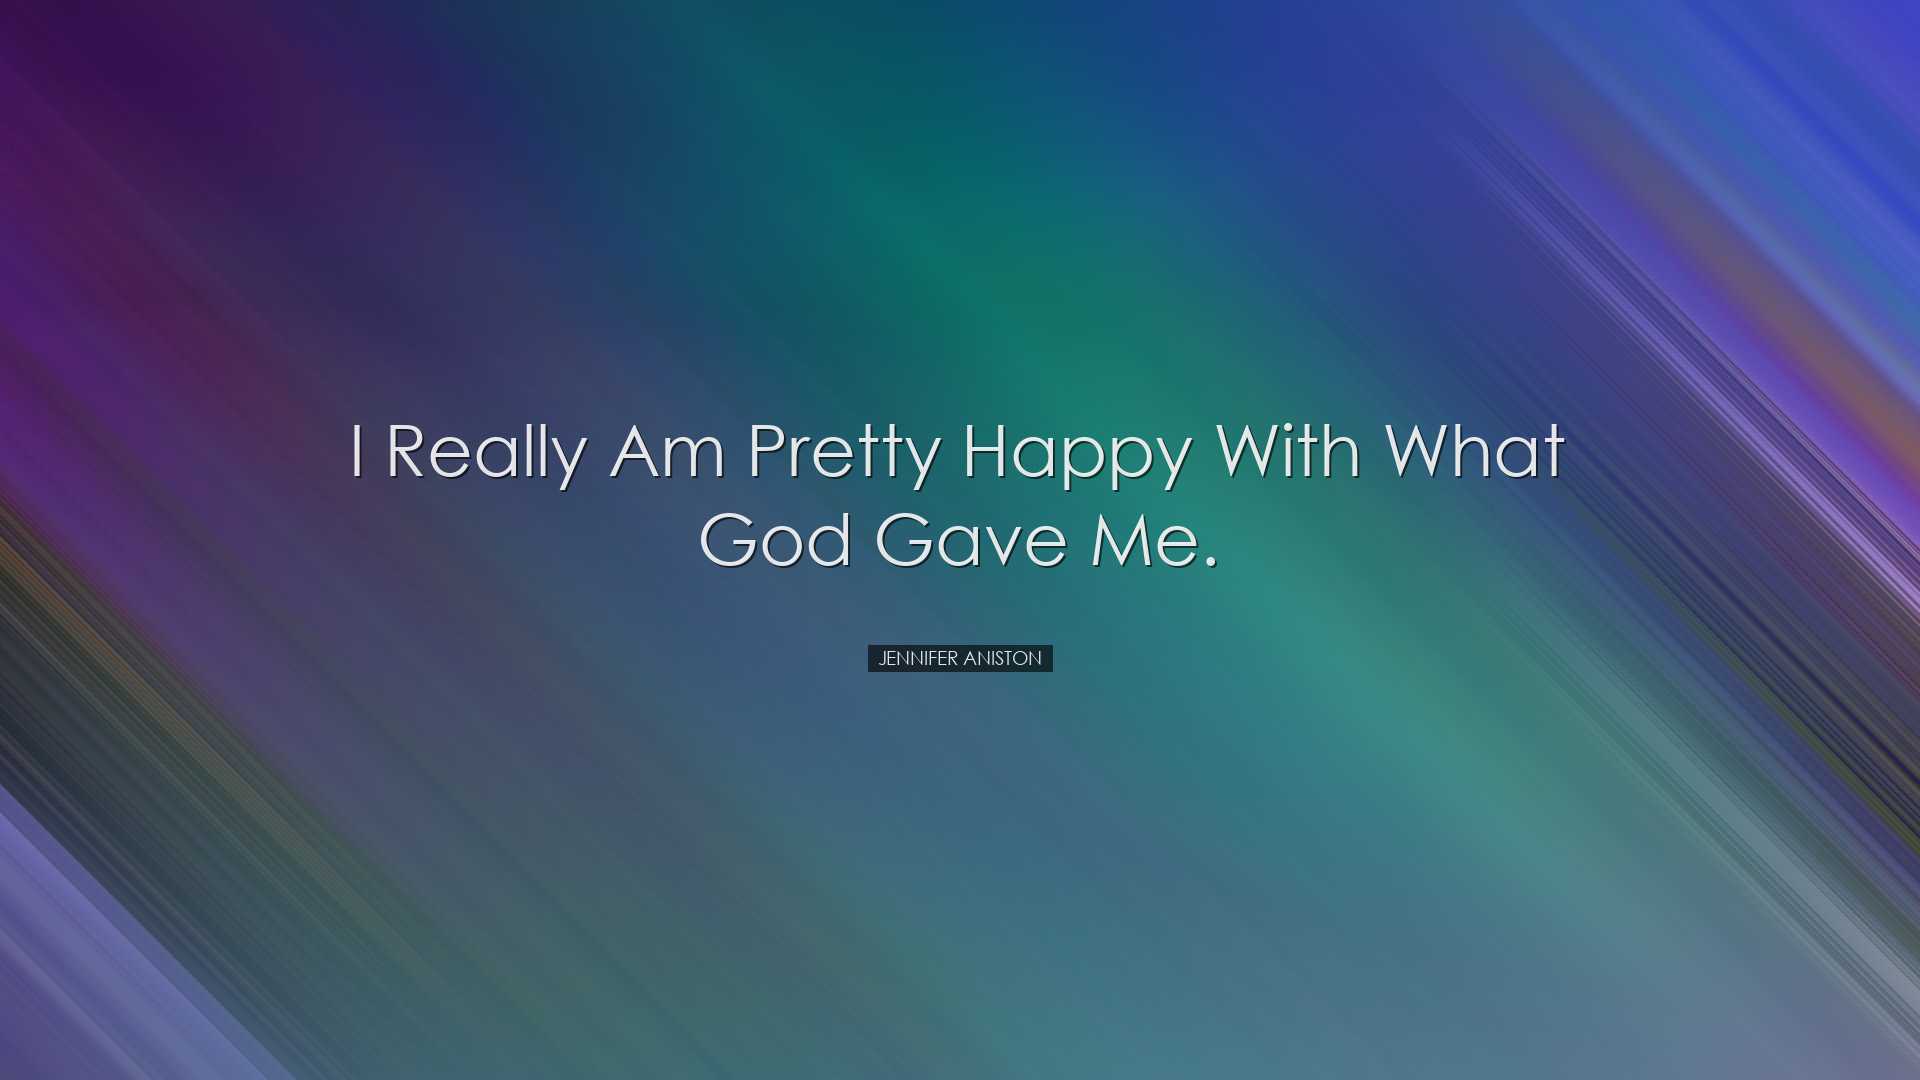 I really am pretty happy with what God gave me. - Jennifer Aniston